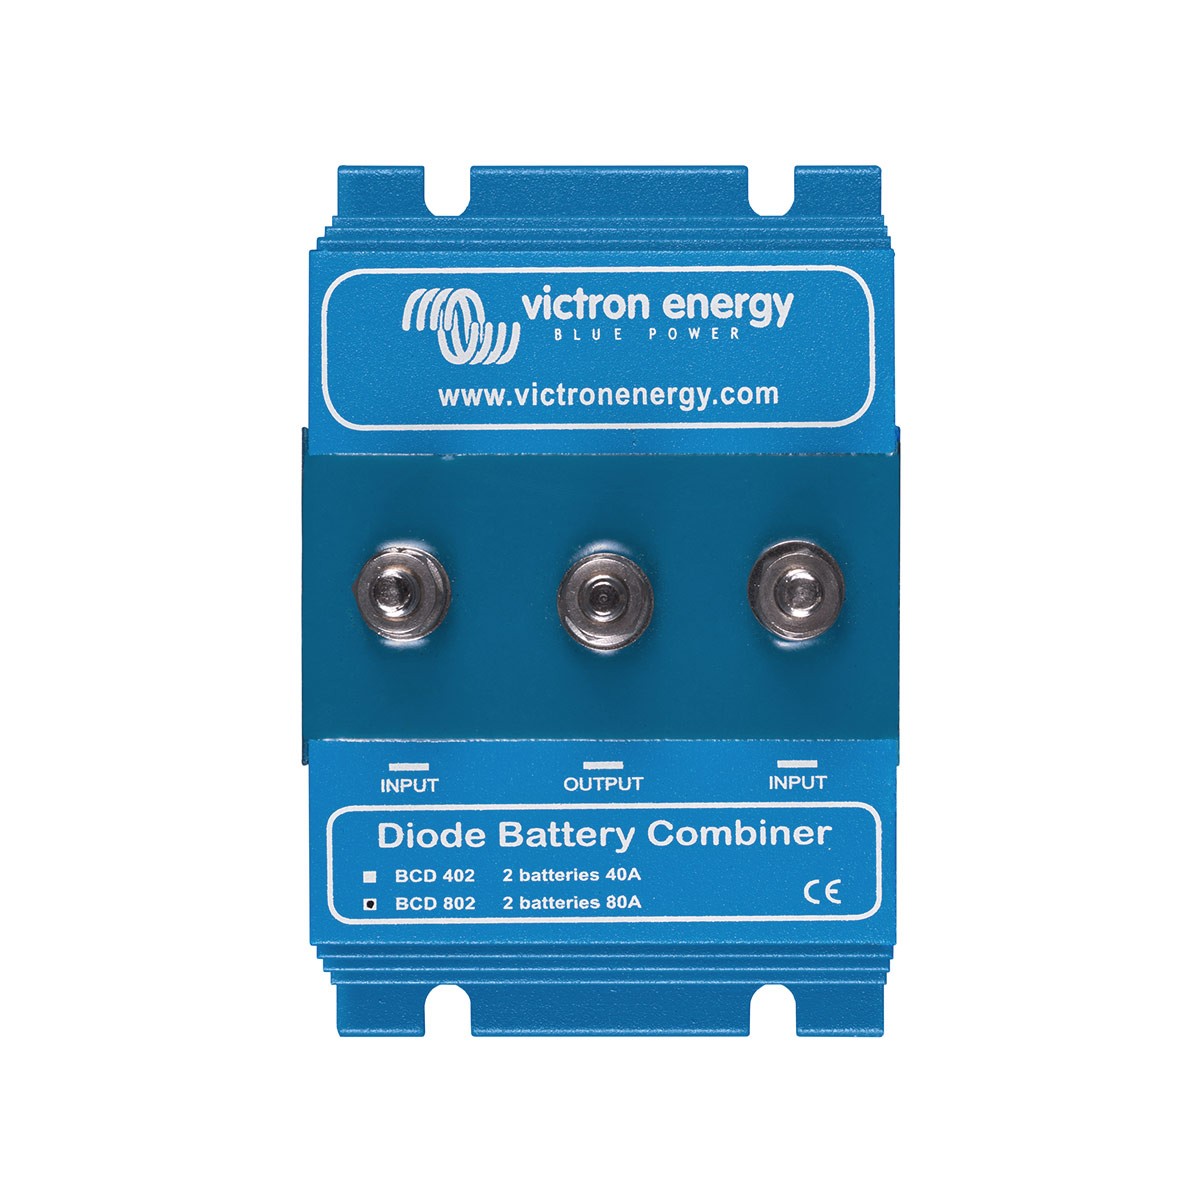 Argo diode switch BCD 802 80 A Victron Energy